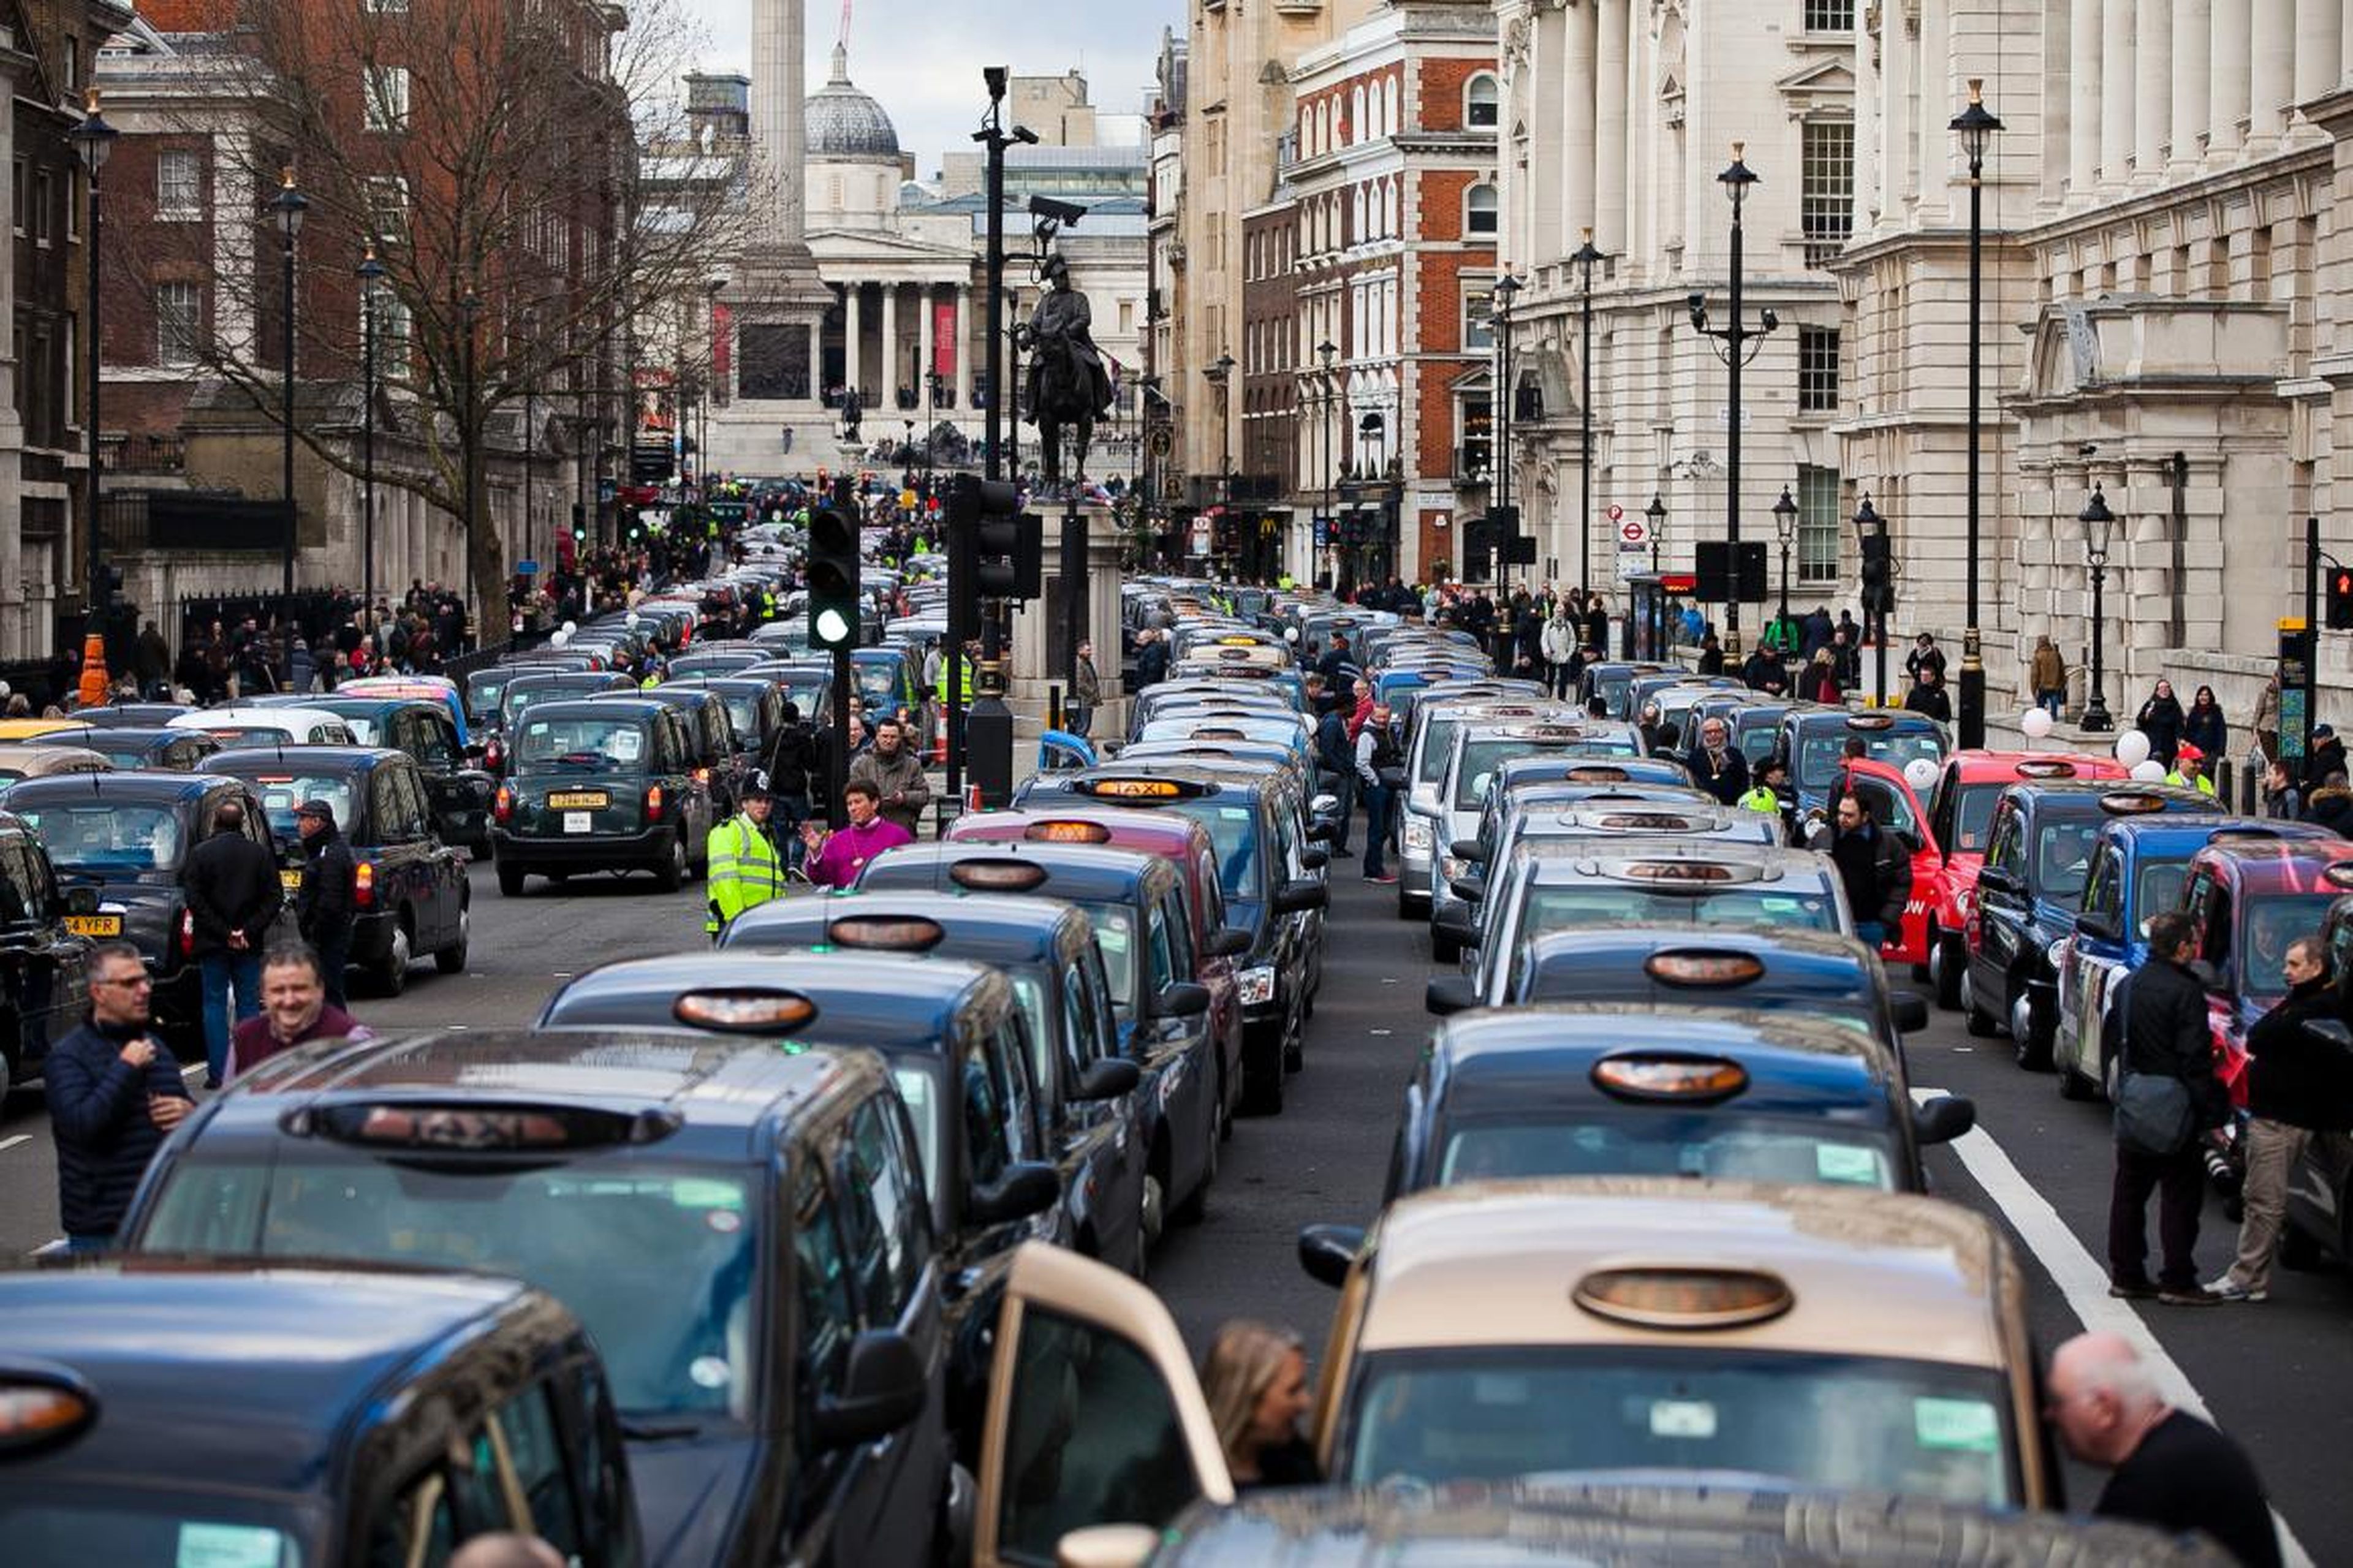 While London implemented congestion pricing fees in 2003, which charges cars a fee for entering certain parts of the city at certain times, it still has the worst traffic in Europe, with the average Londoner losing 74 hours per